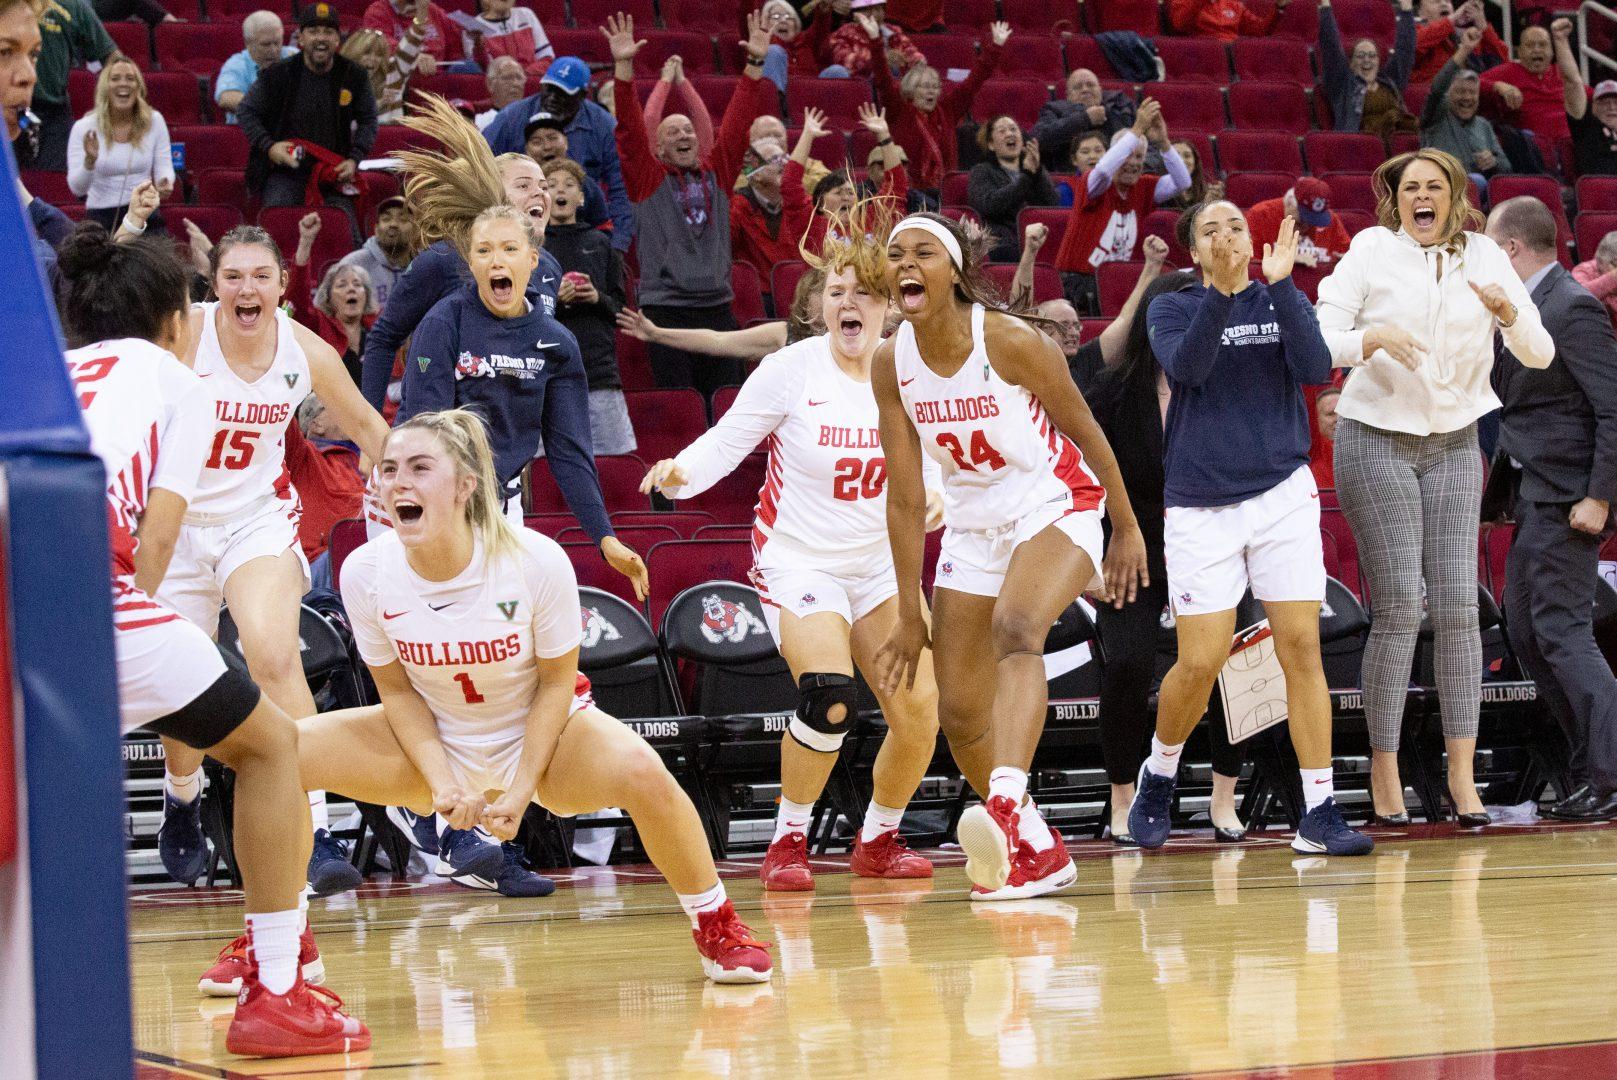 Aly Gamez (22) celebrates with her teammates after shooting the game winning layup at the buzzer against Colorado State Rams at the Save Mart Center on Wednesday, Jan. 22, 2020. (Armando Carreno/The Collegian)